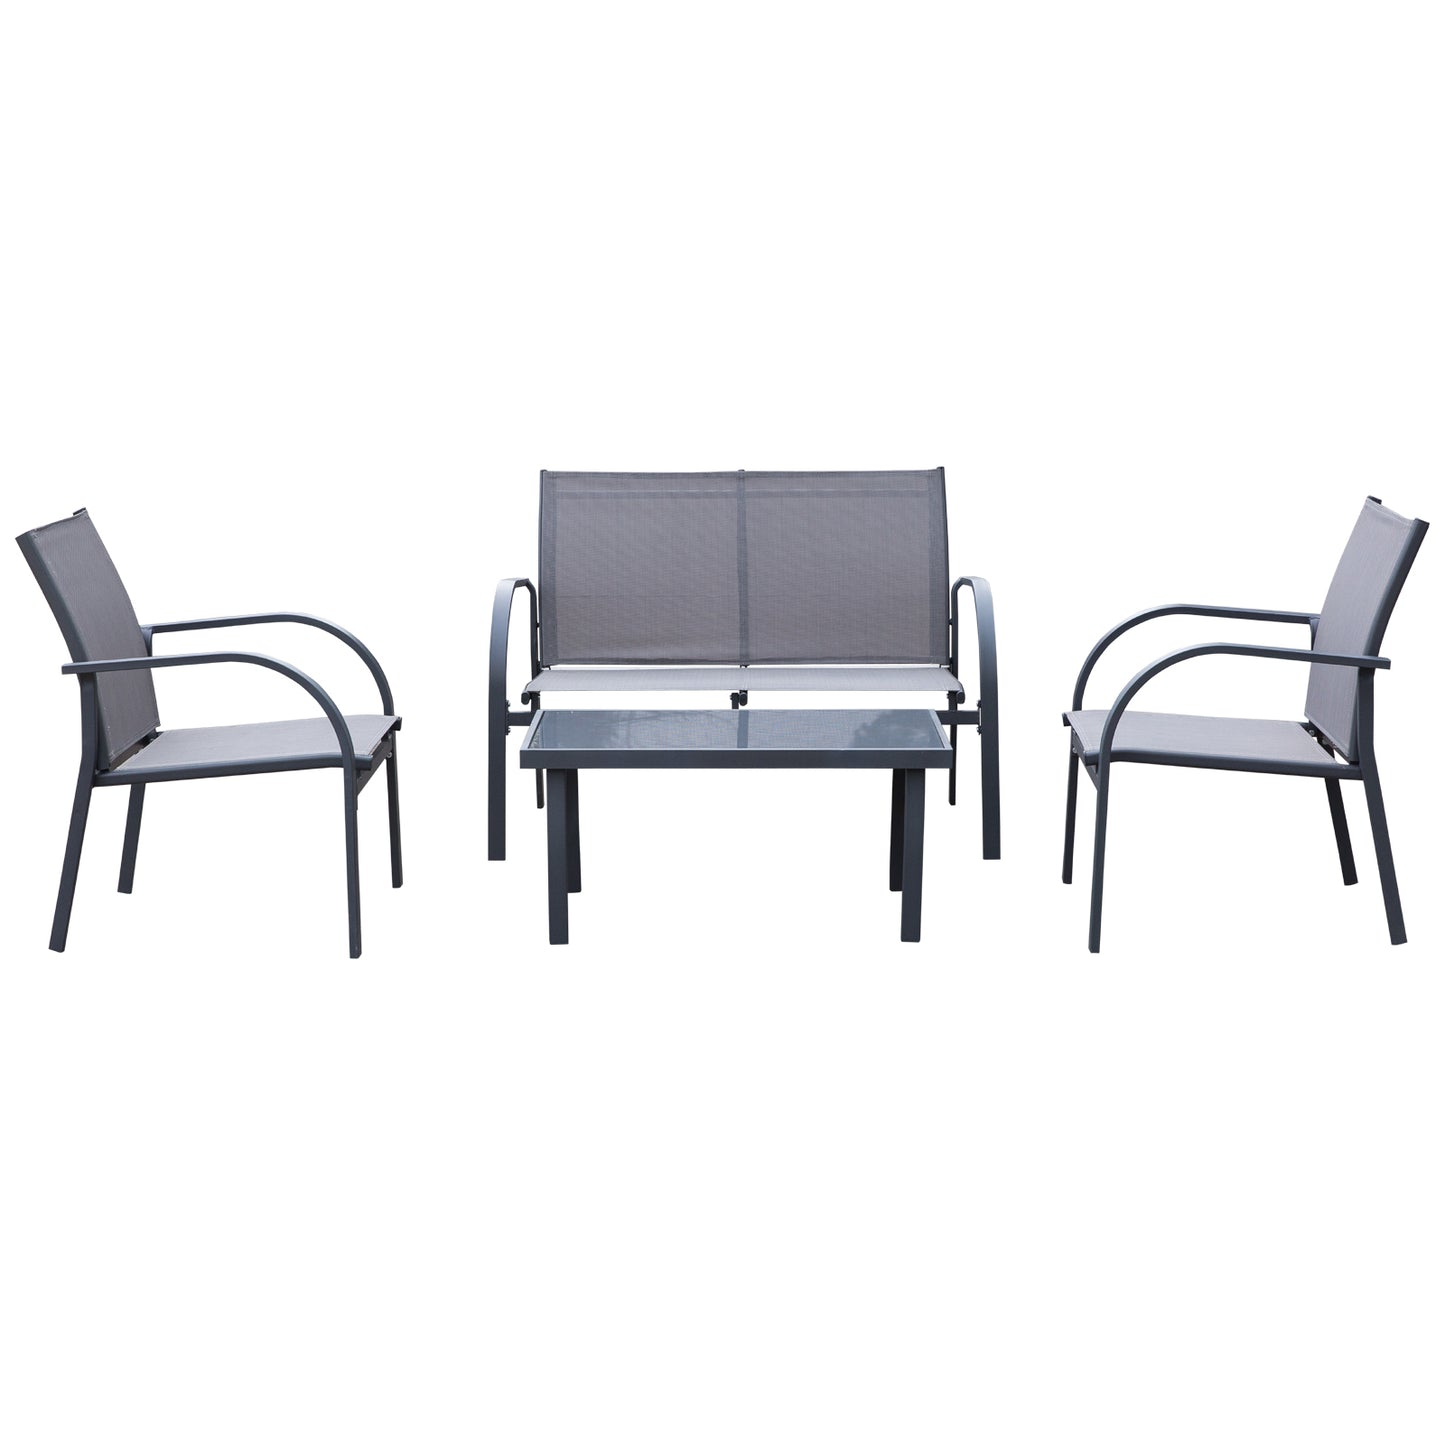 Outsunny 4 Pcs Curved Steel Outdoor Dining Set w/ Loveseat 2 Chairs Glass Top Table Grey